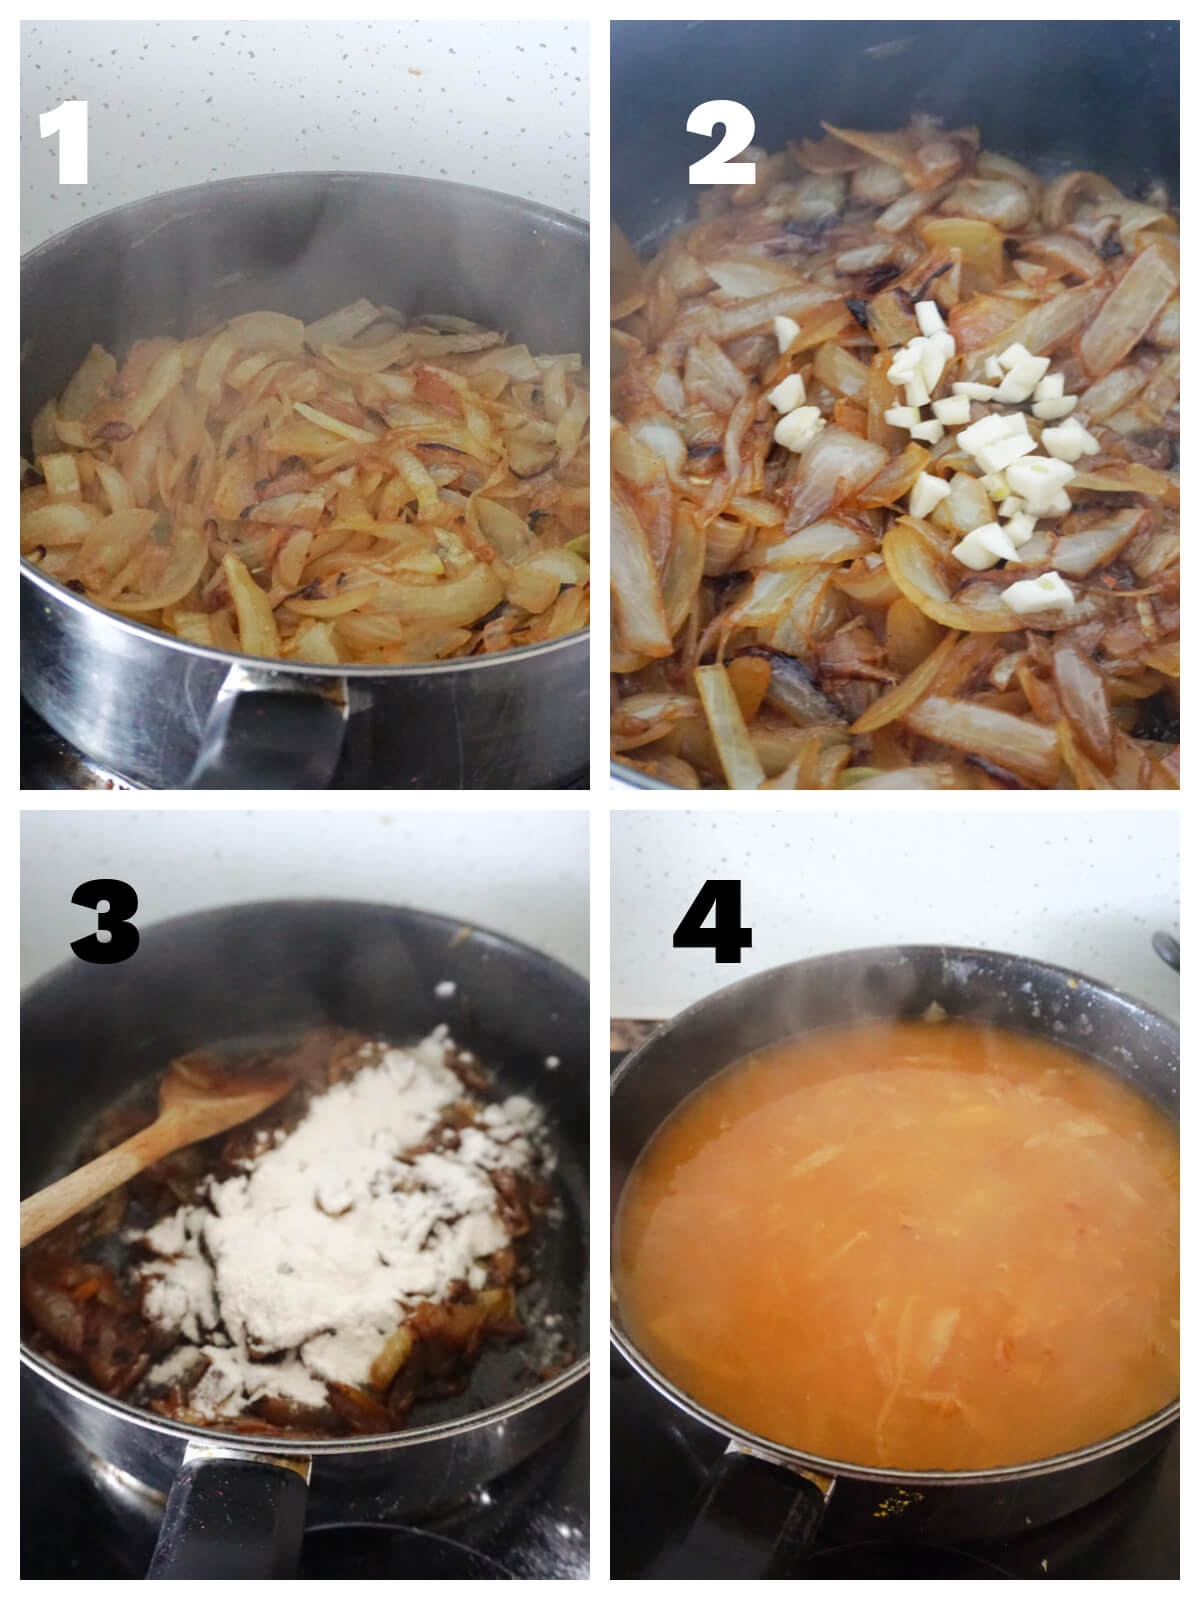 Collage of 4 photos to show how to make onion soup.